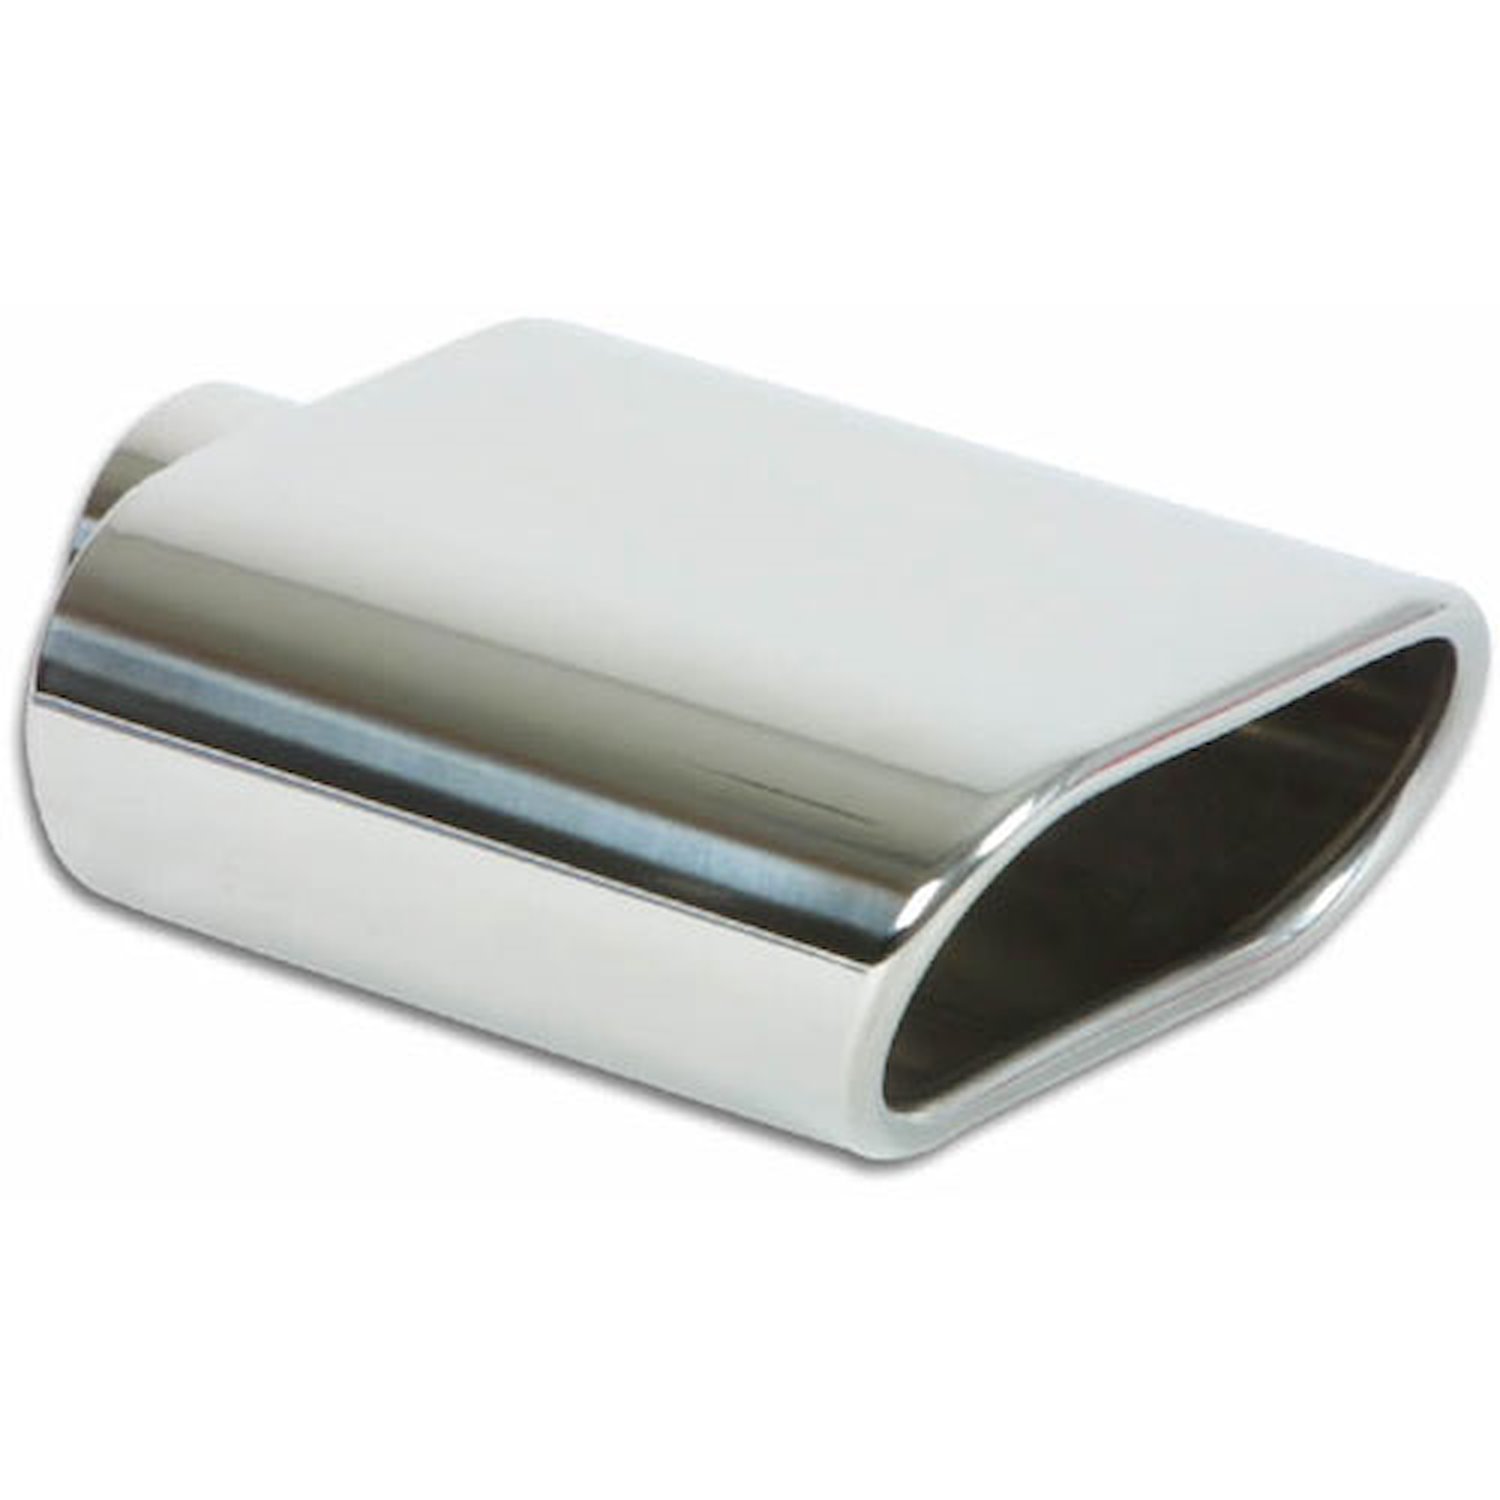 5.5" x 3" Oval Stainless Steel Exhaust Tip